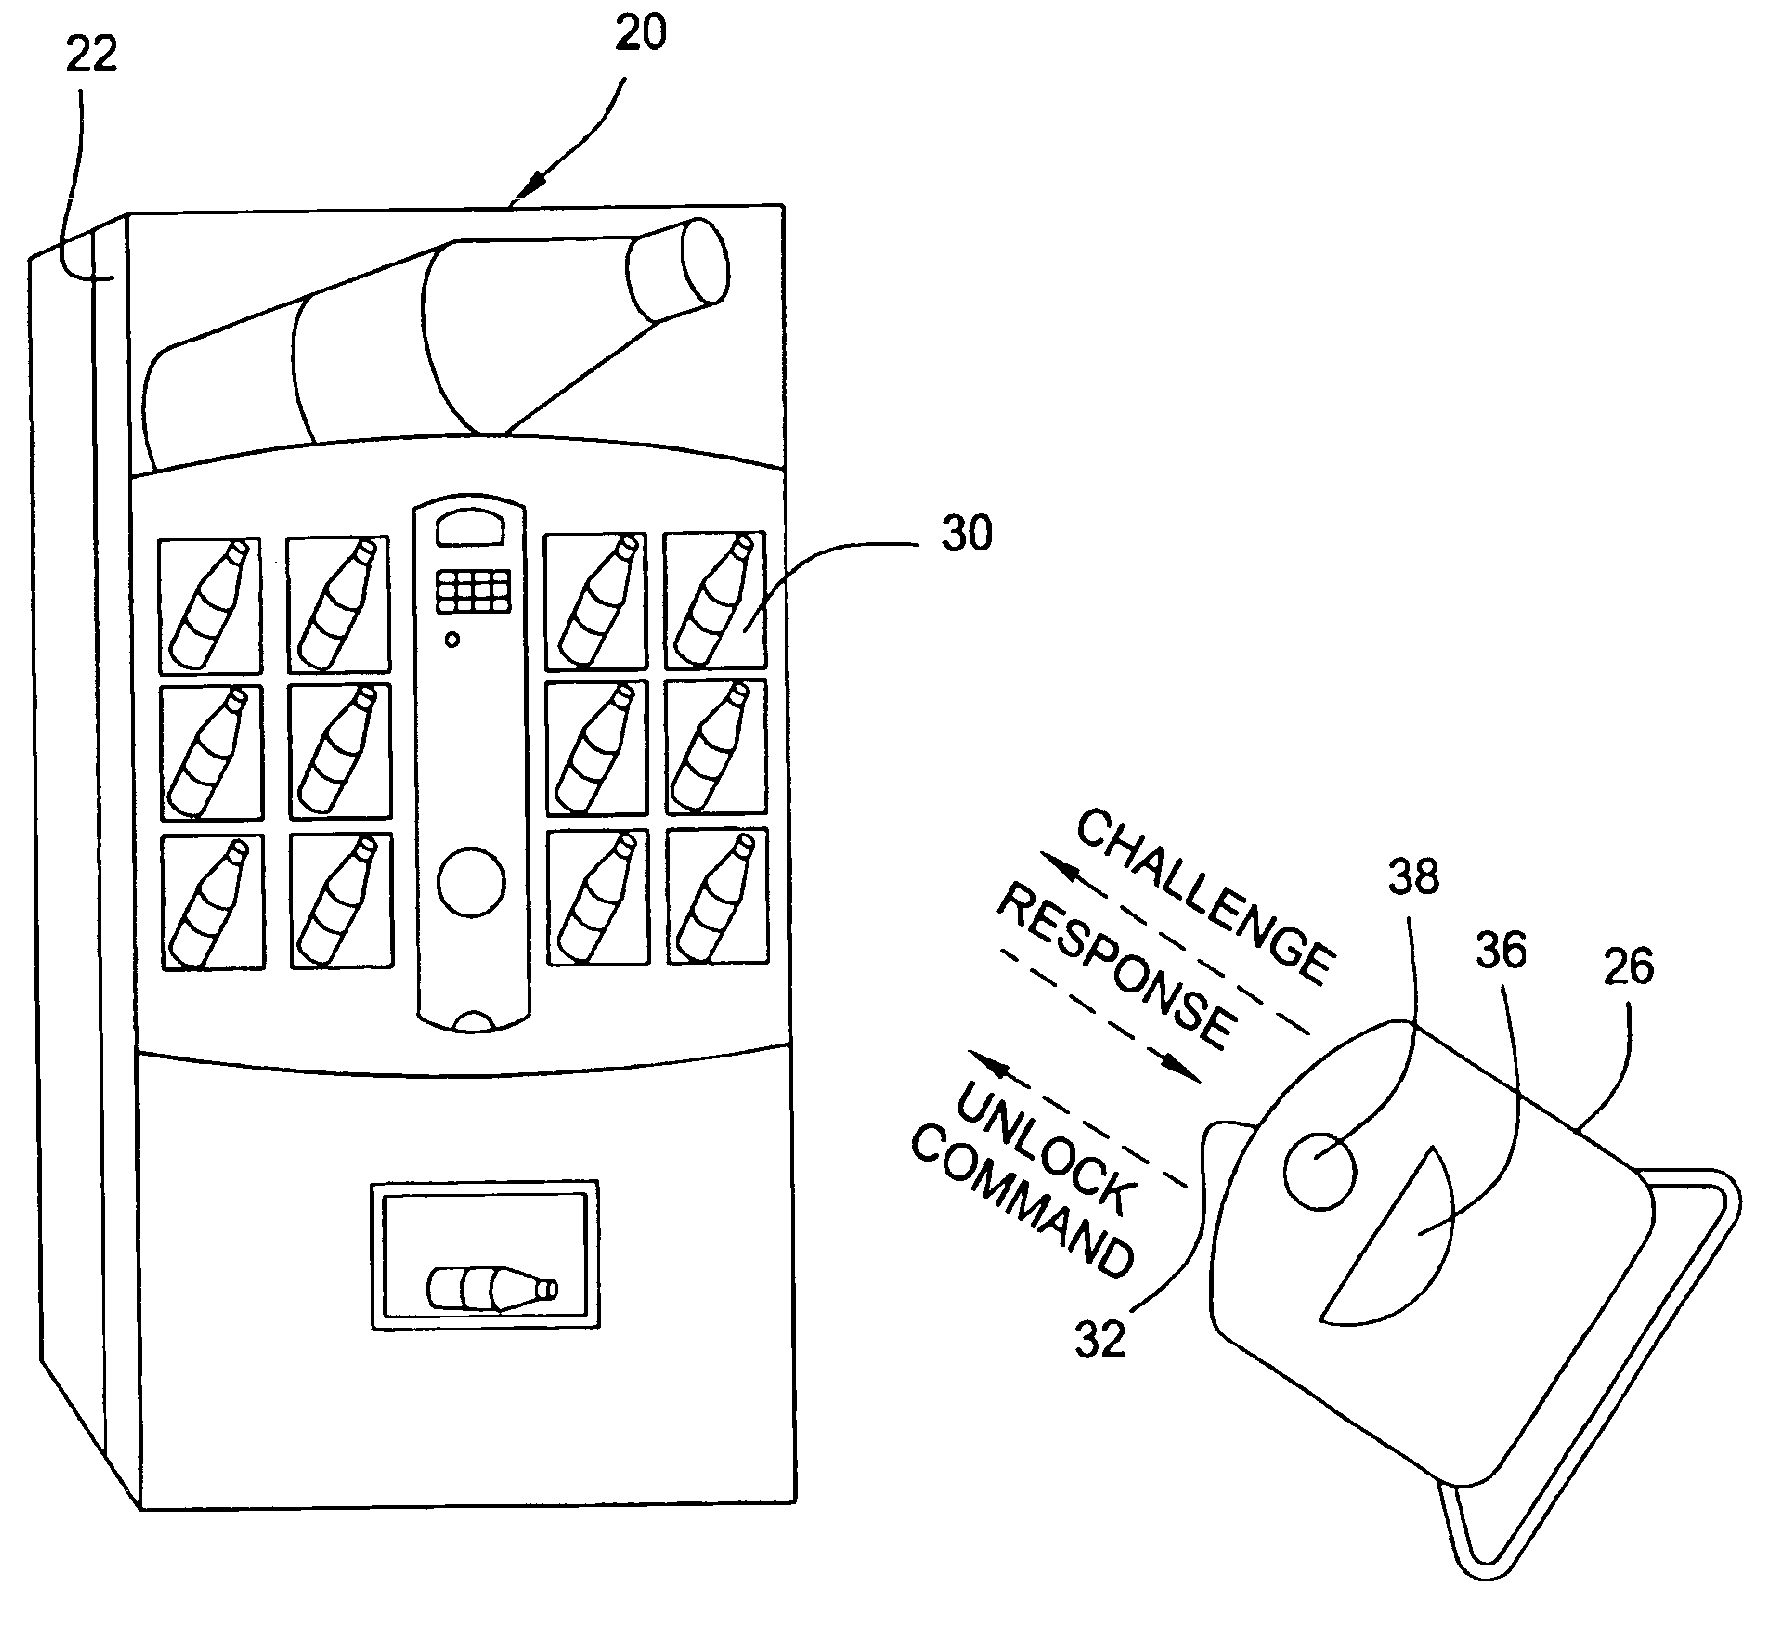 Vending machines with field-programmable locks